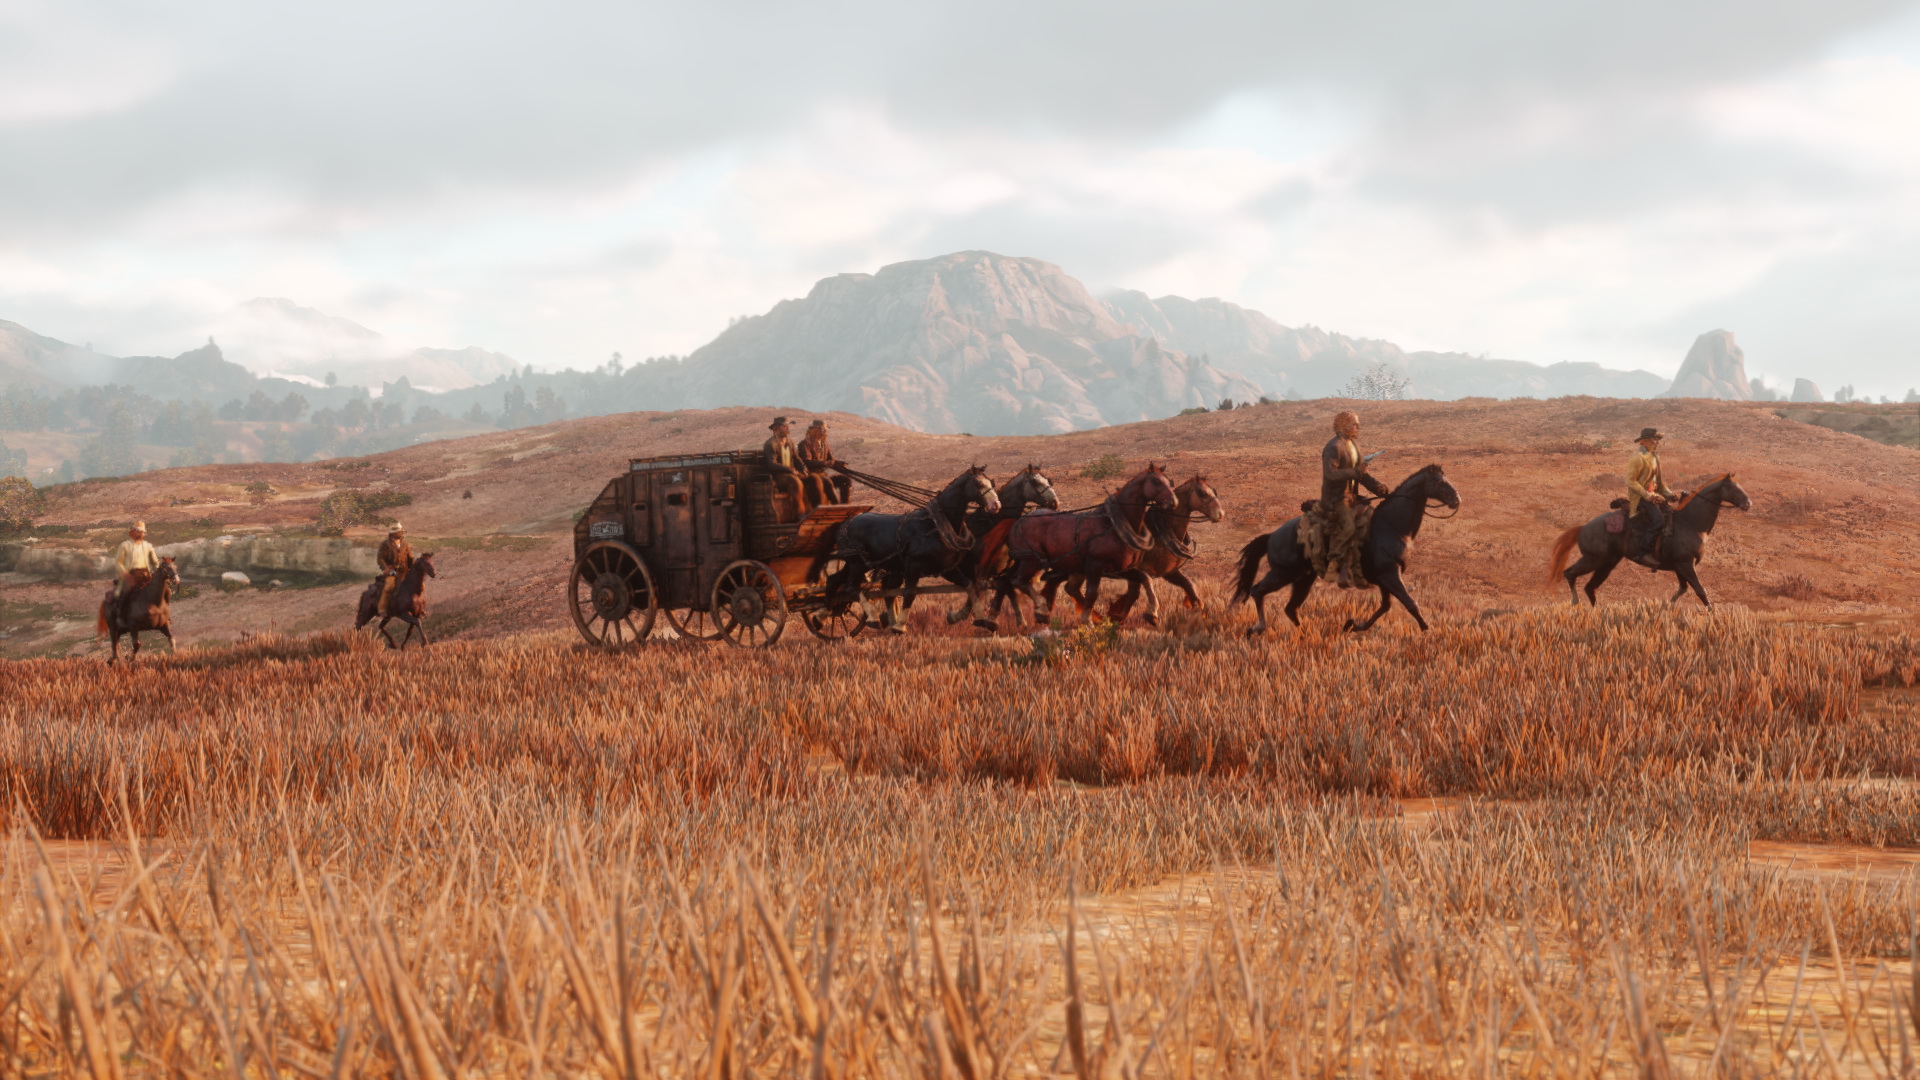 Media asset in full size related to 3dfxzone.it news item entitled as follows: Rockstar Games rinvia il lancio del game Red Dead Redemption 2 | Image Name: news26396_Red-Dead-Redemption-2-Screenshot_3.jpg